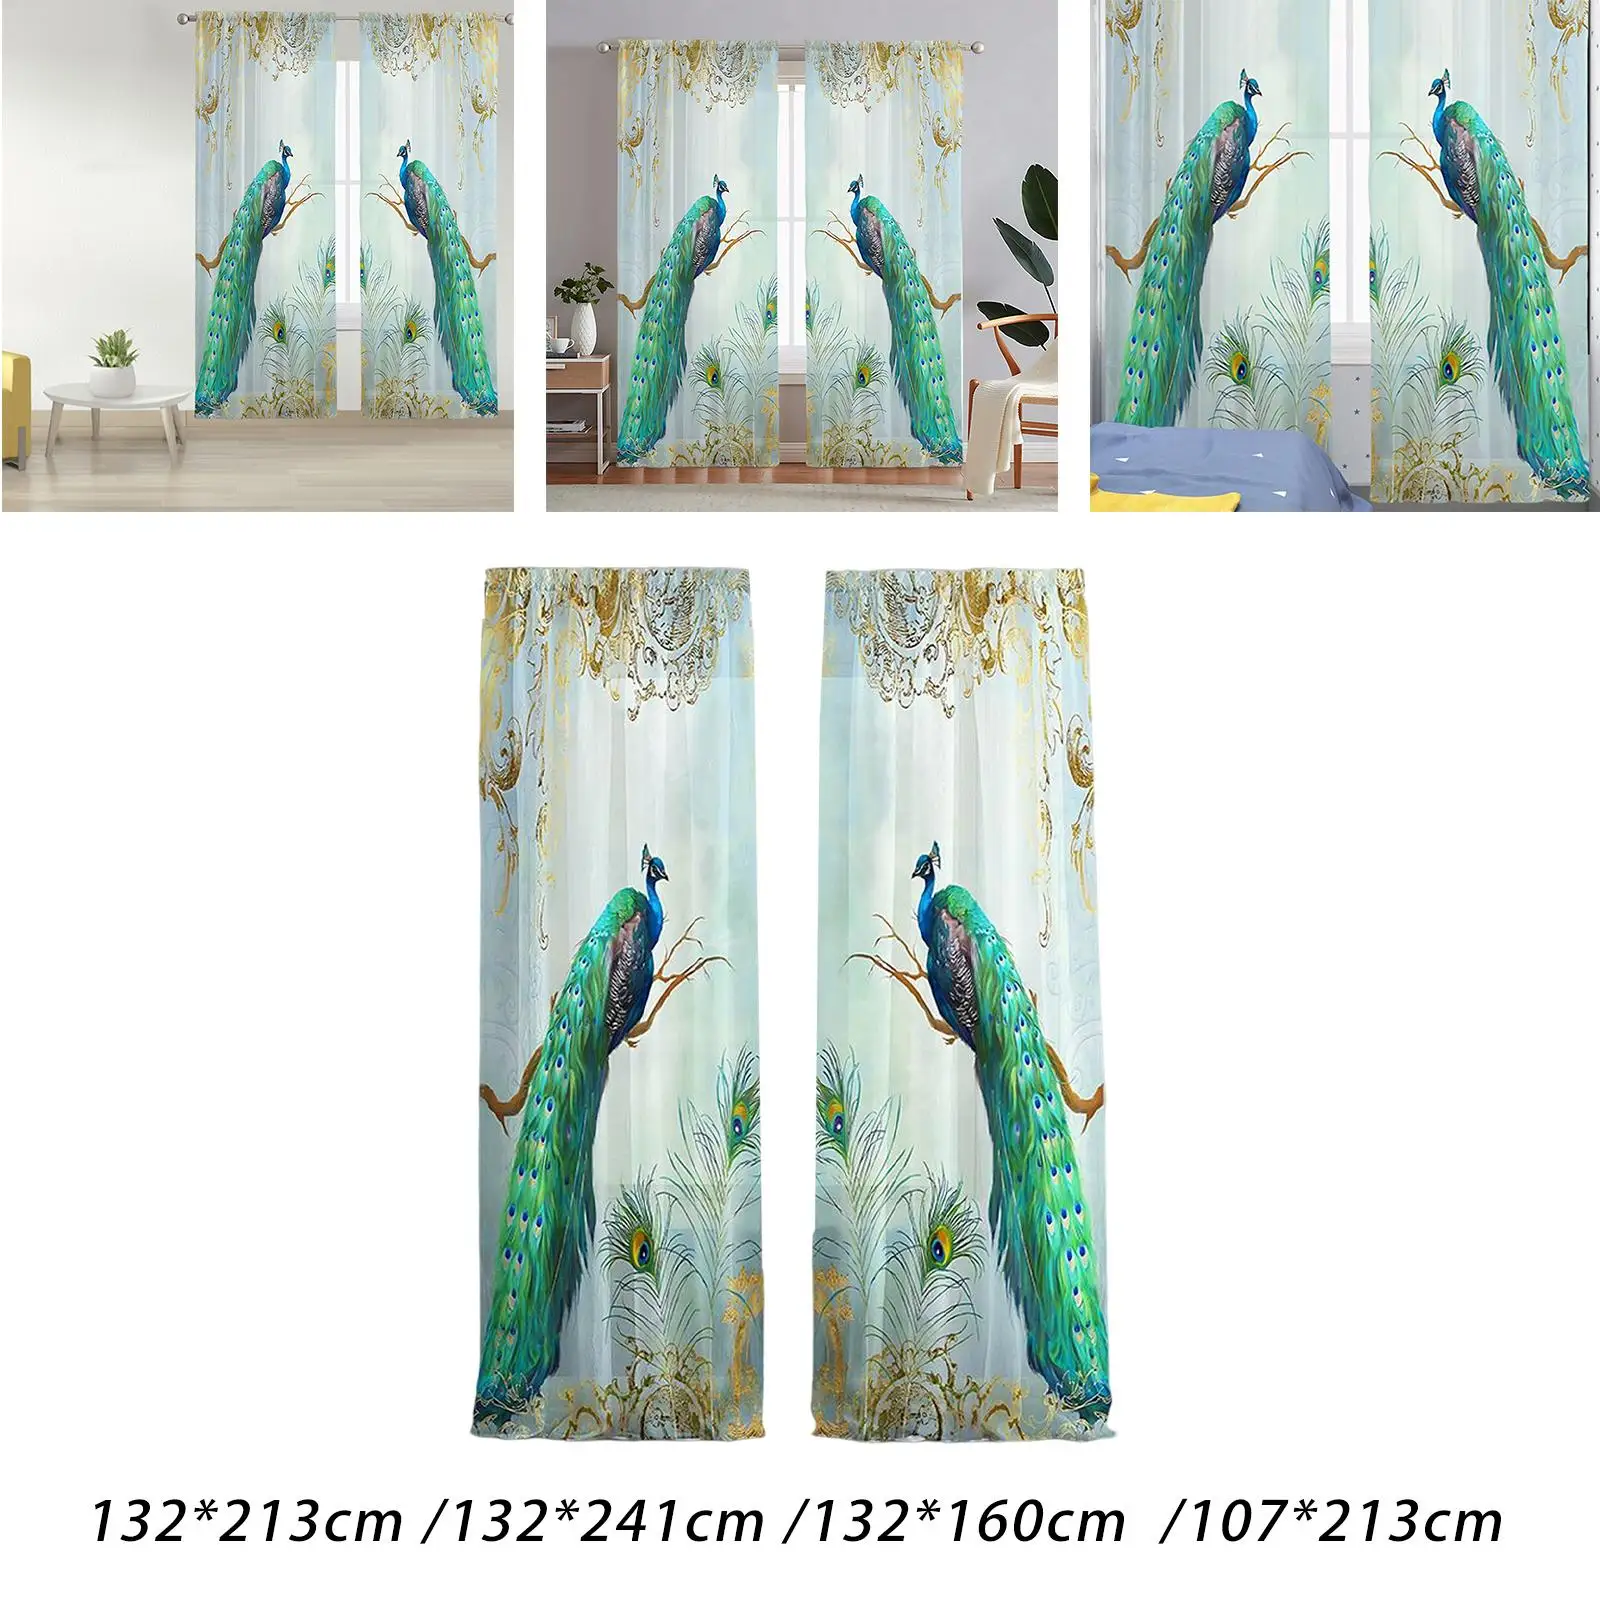 2x Peacock Blue Tulle Curtains Window Treatment Drapes for Dining Room Window Bedroom